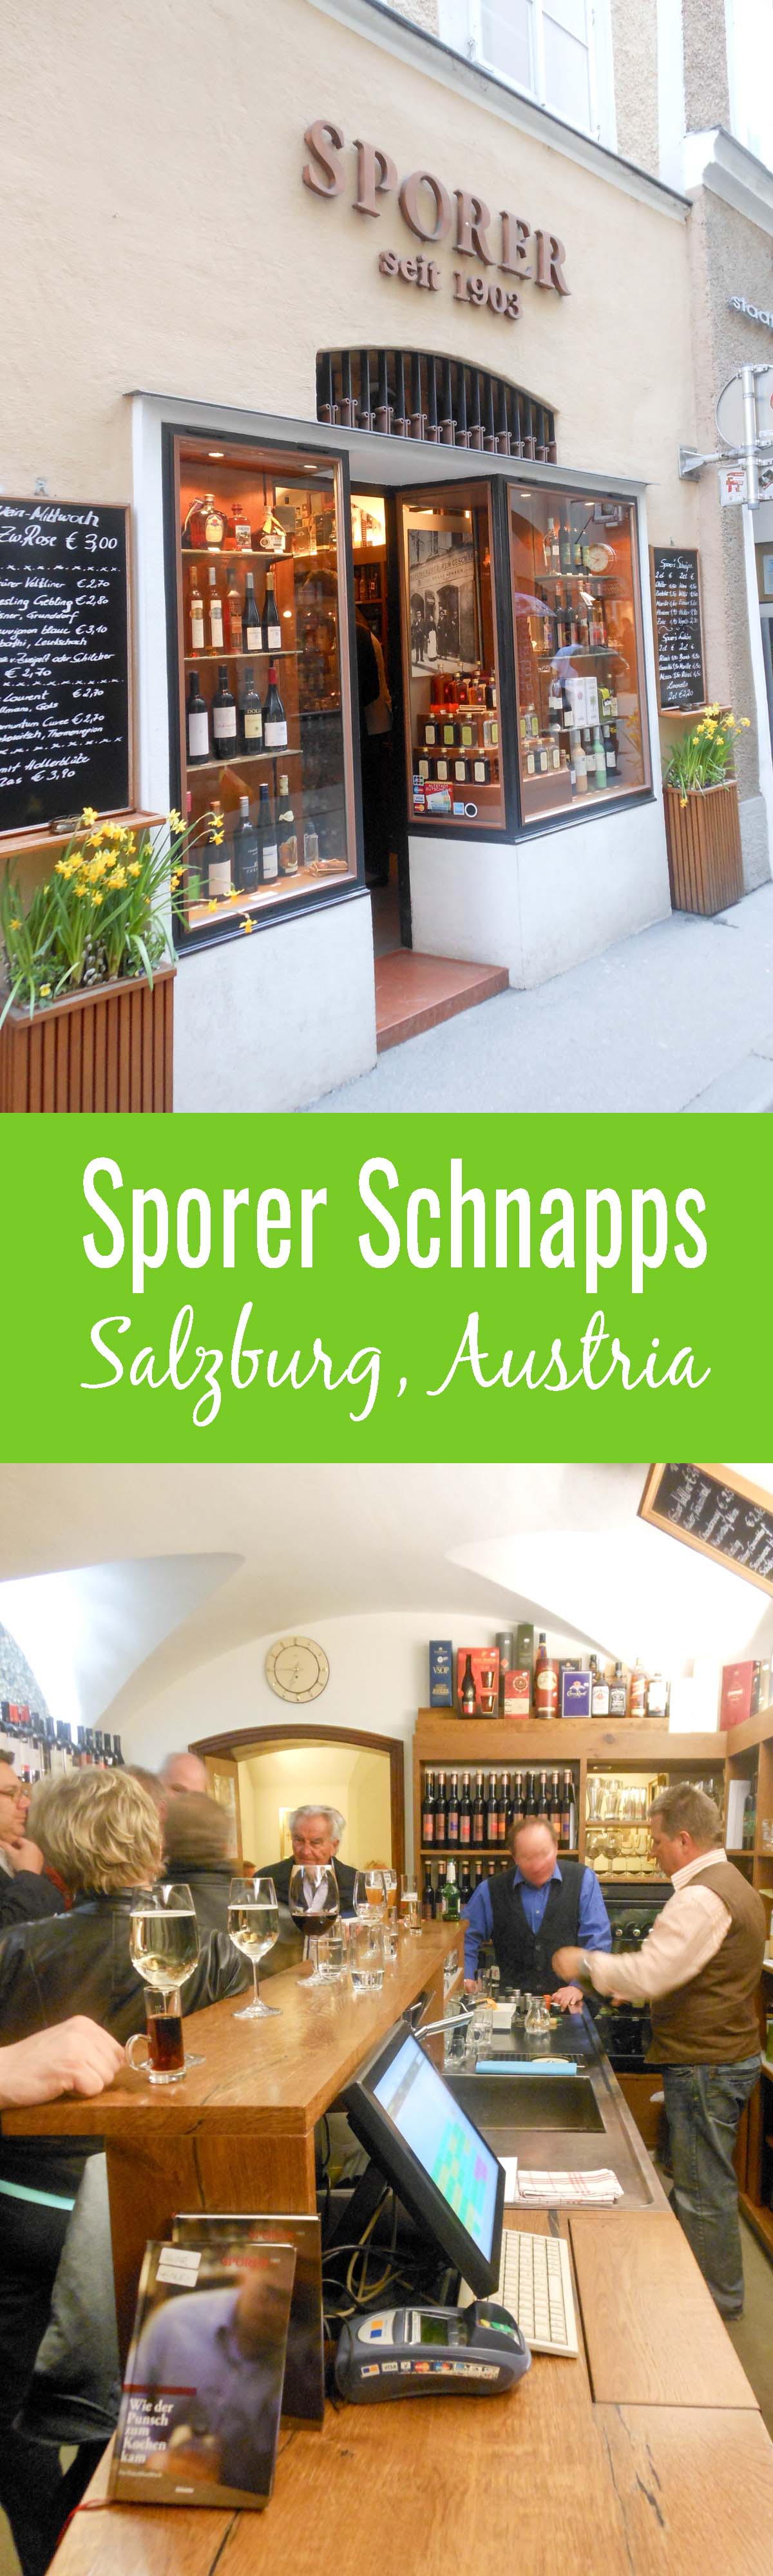 Sporer Salzburg is a must visit for a true taste of authentic schnapps. Sporer Schnapps is in the heart of Salzburg and will not disappoint!